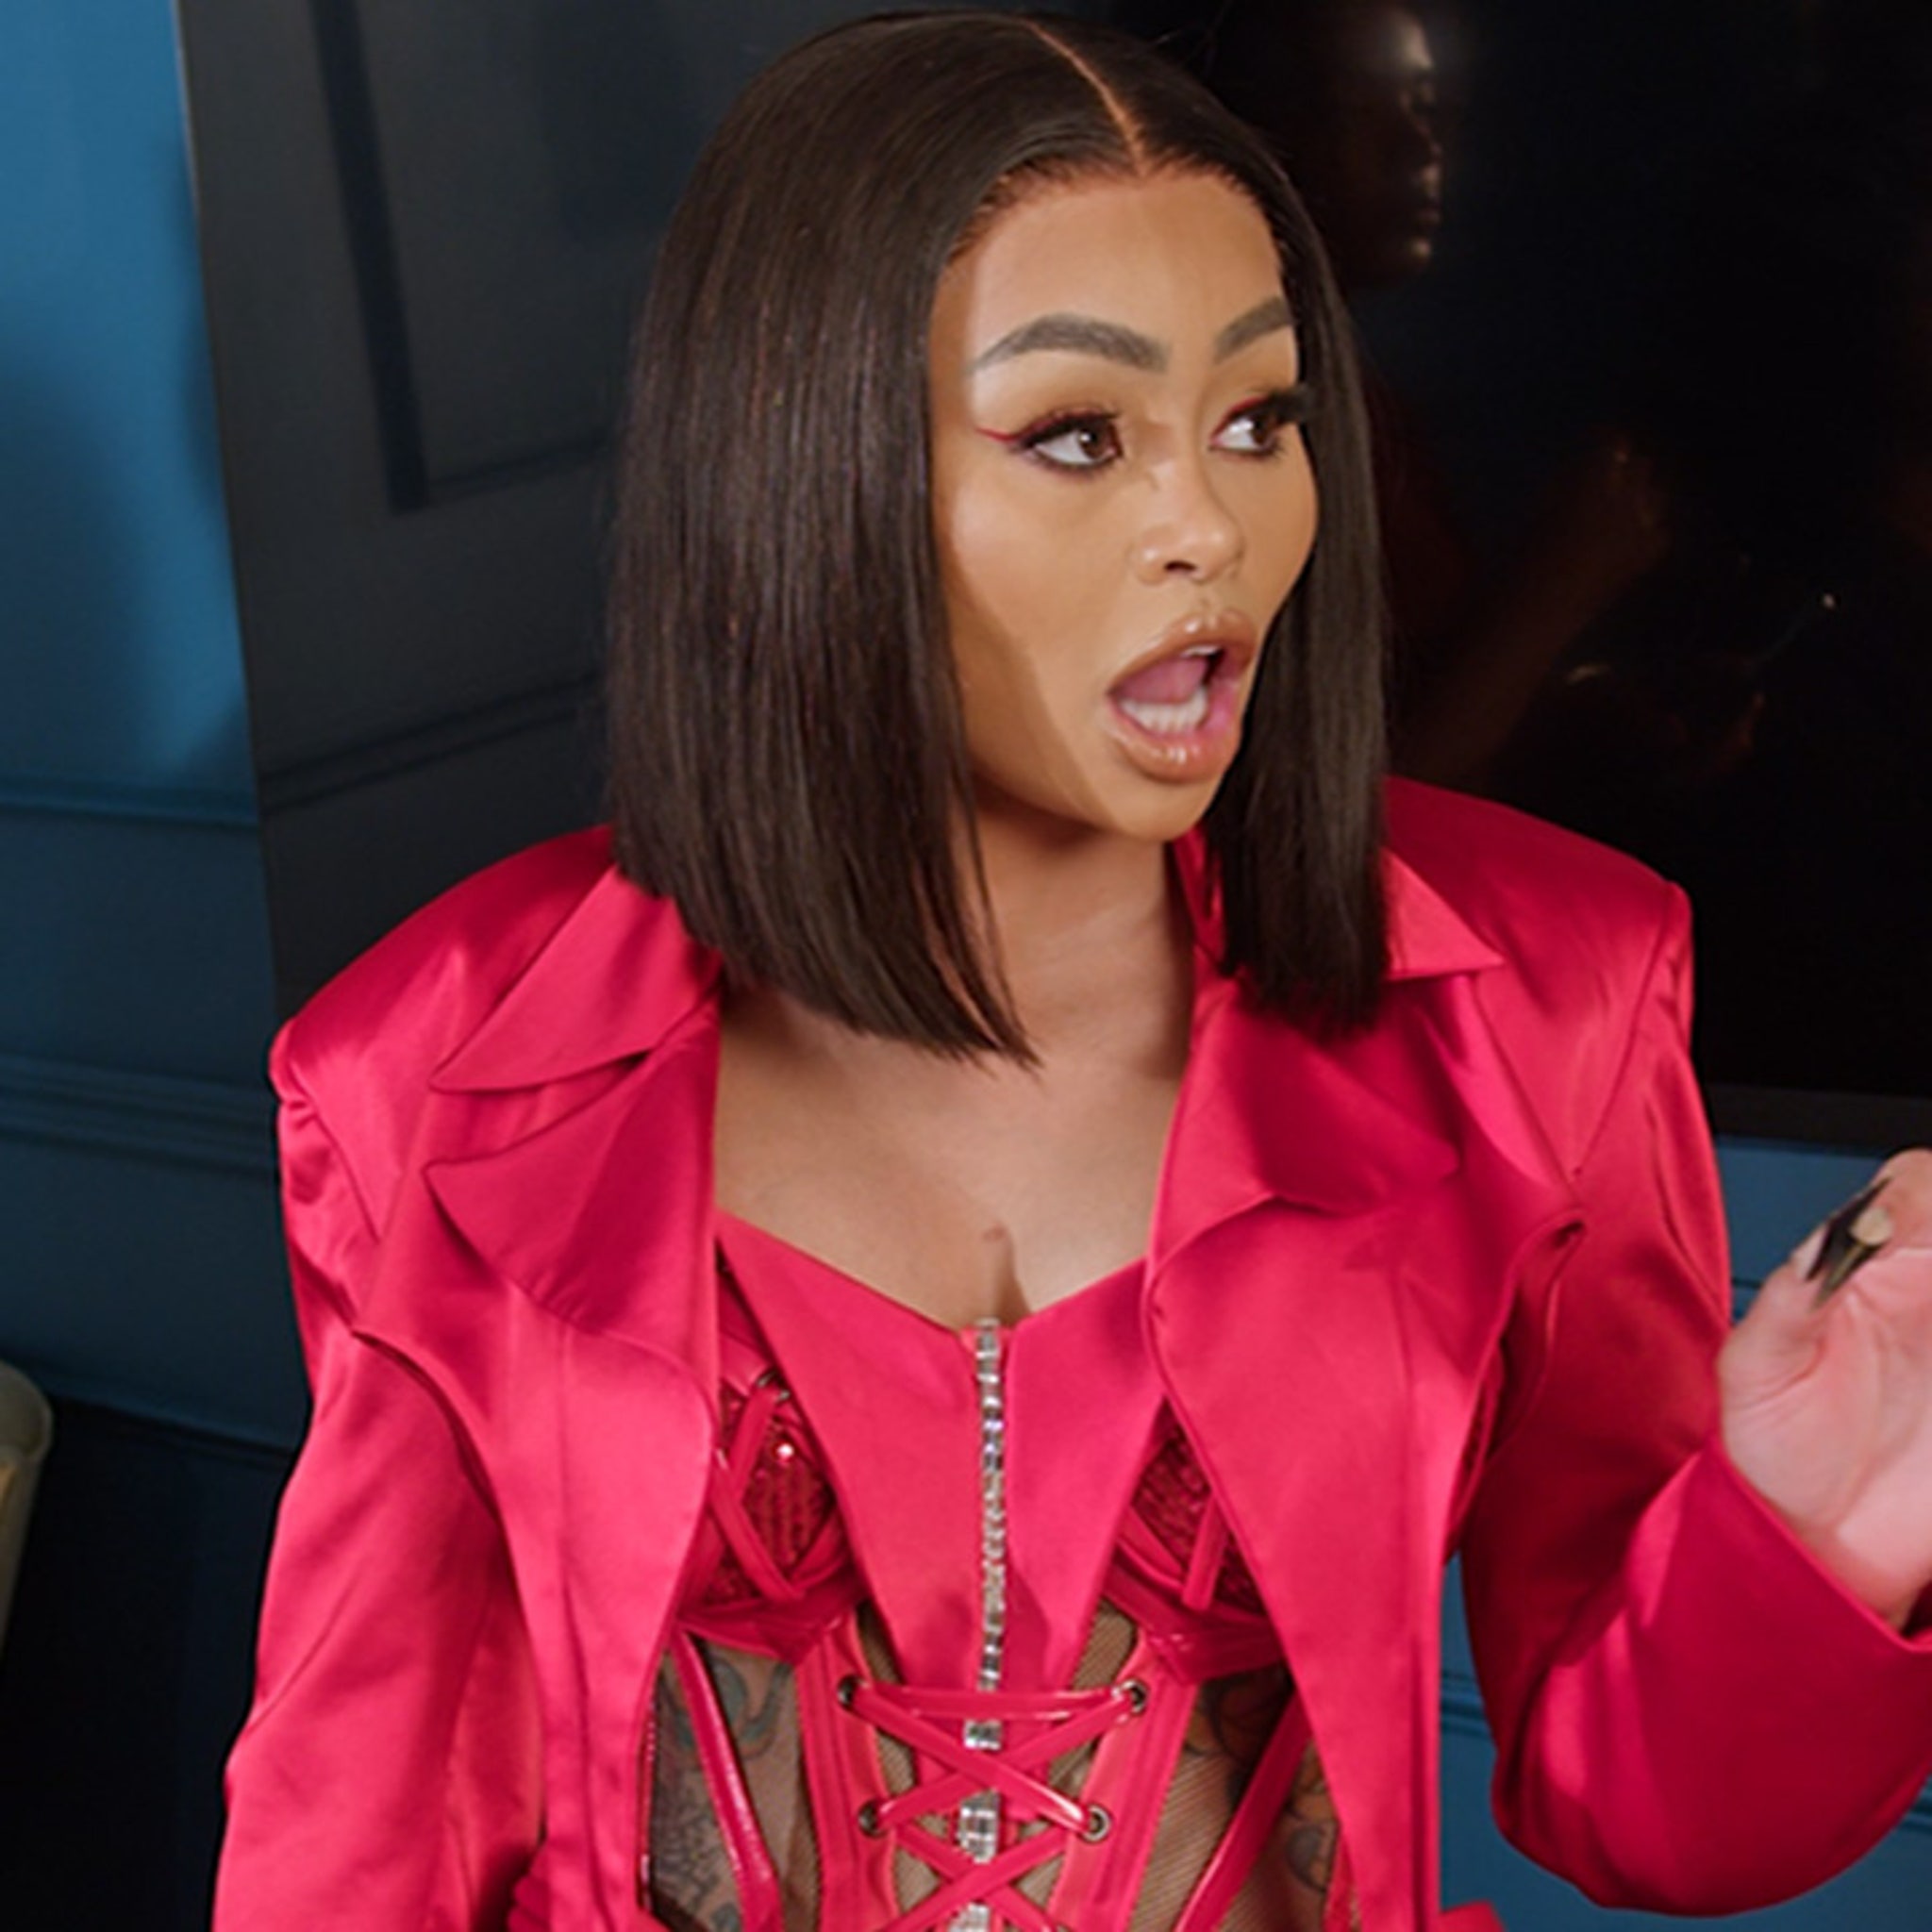 See Blac Chyna as a Crisis Publicist in Secret Society 2 Trailer